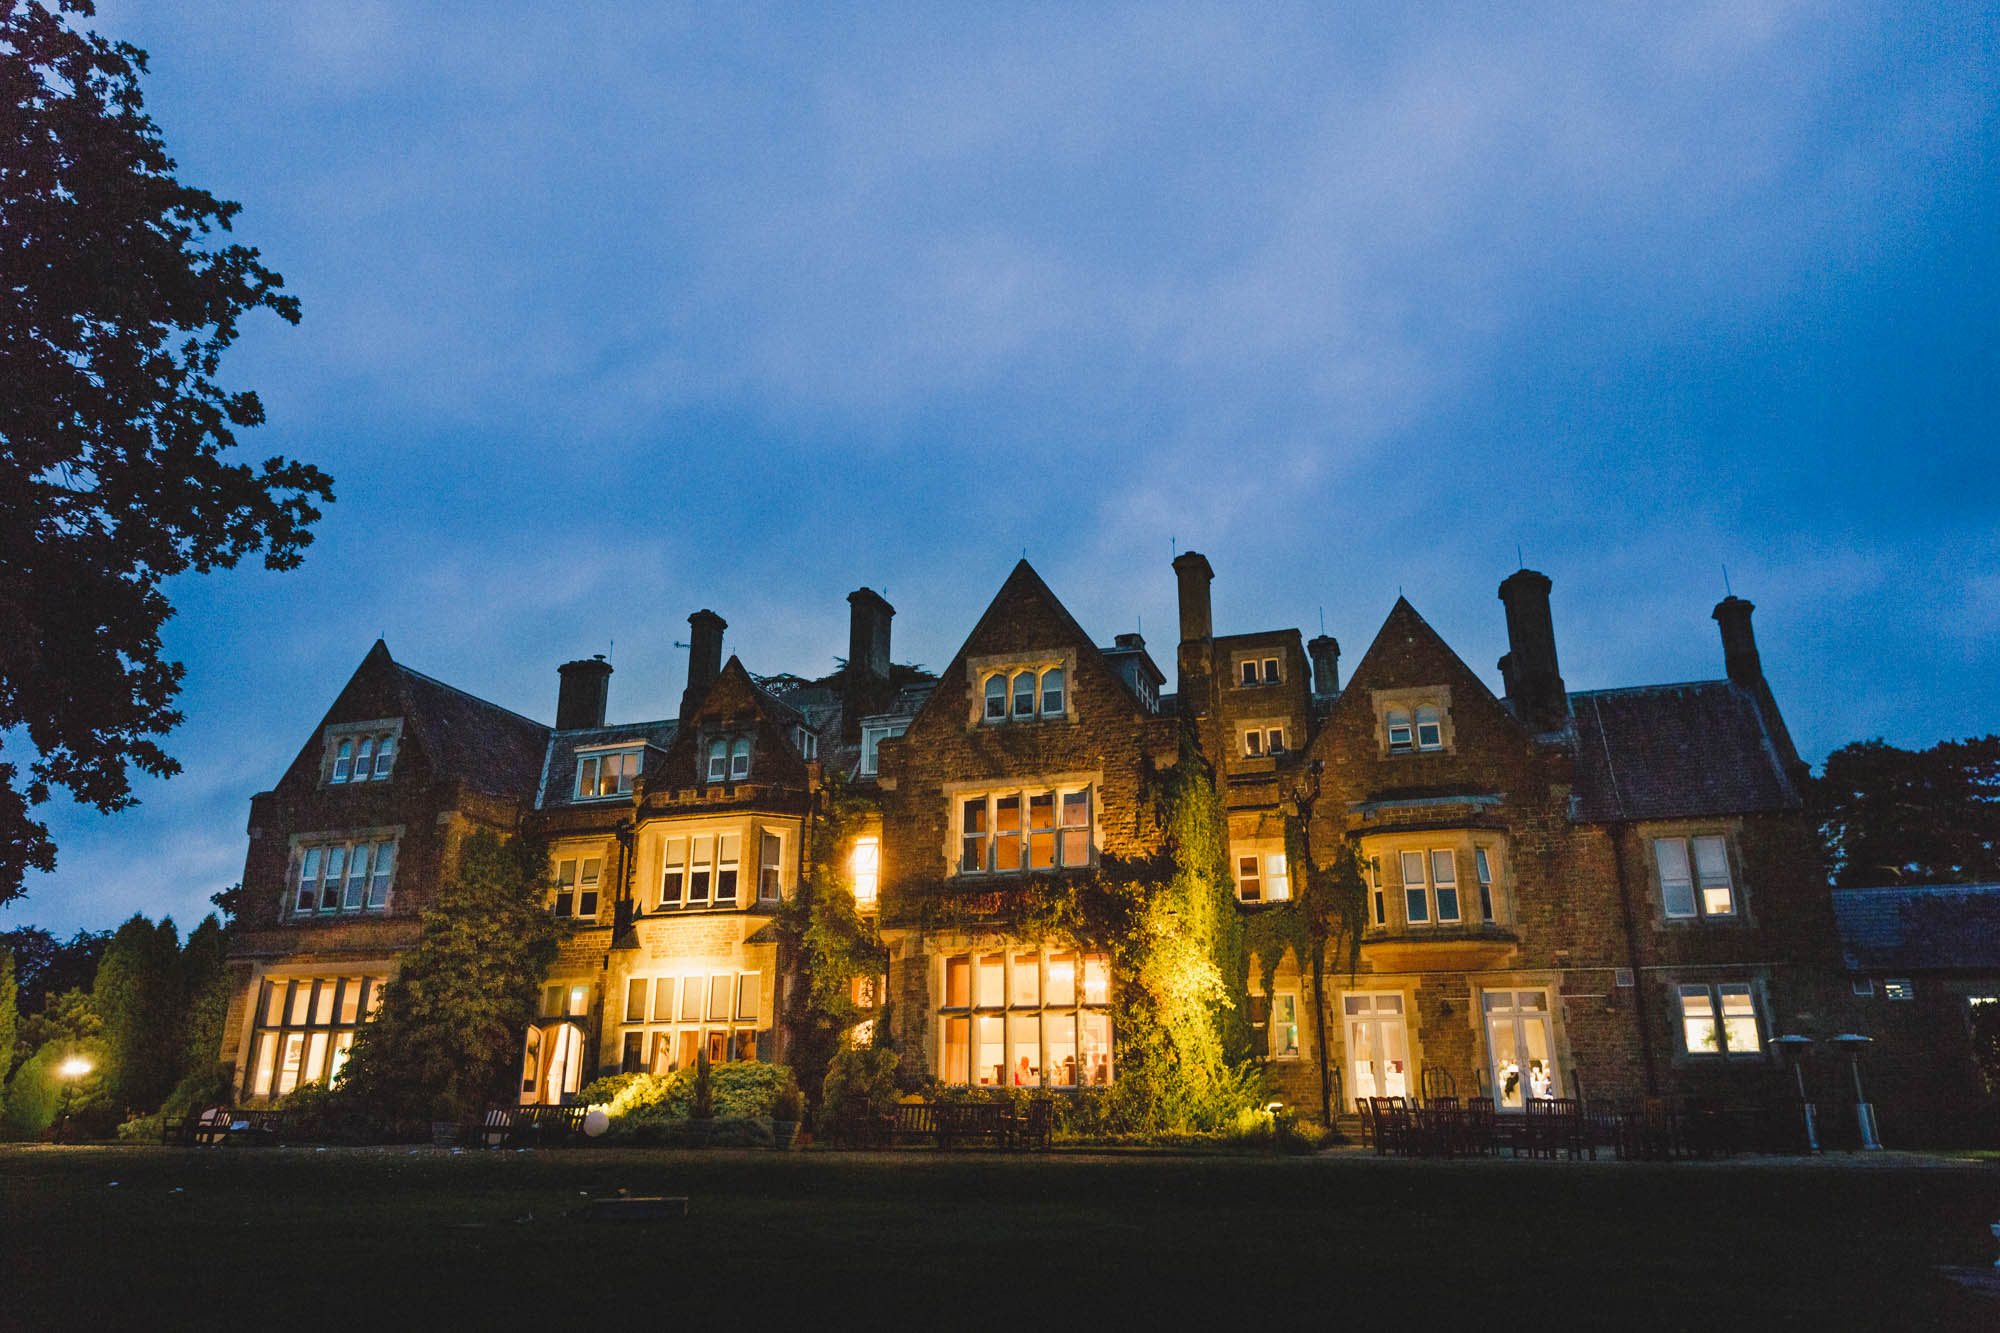 Hartsfield Manor during the blue hour.